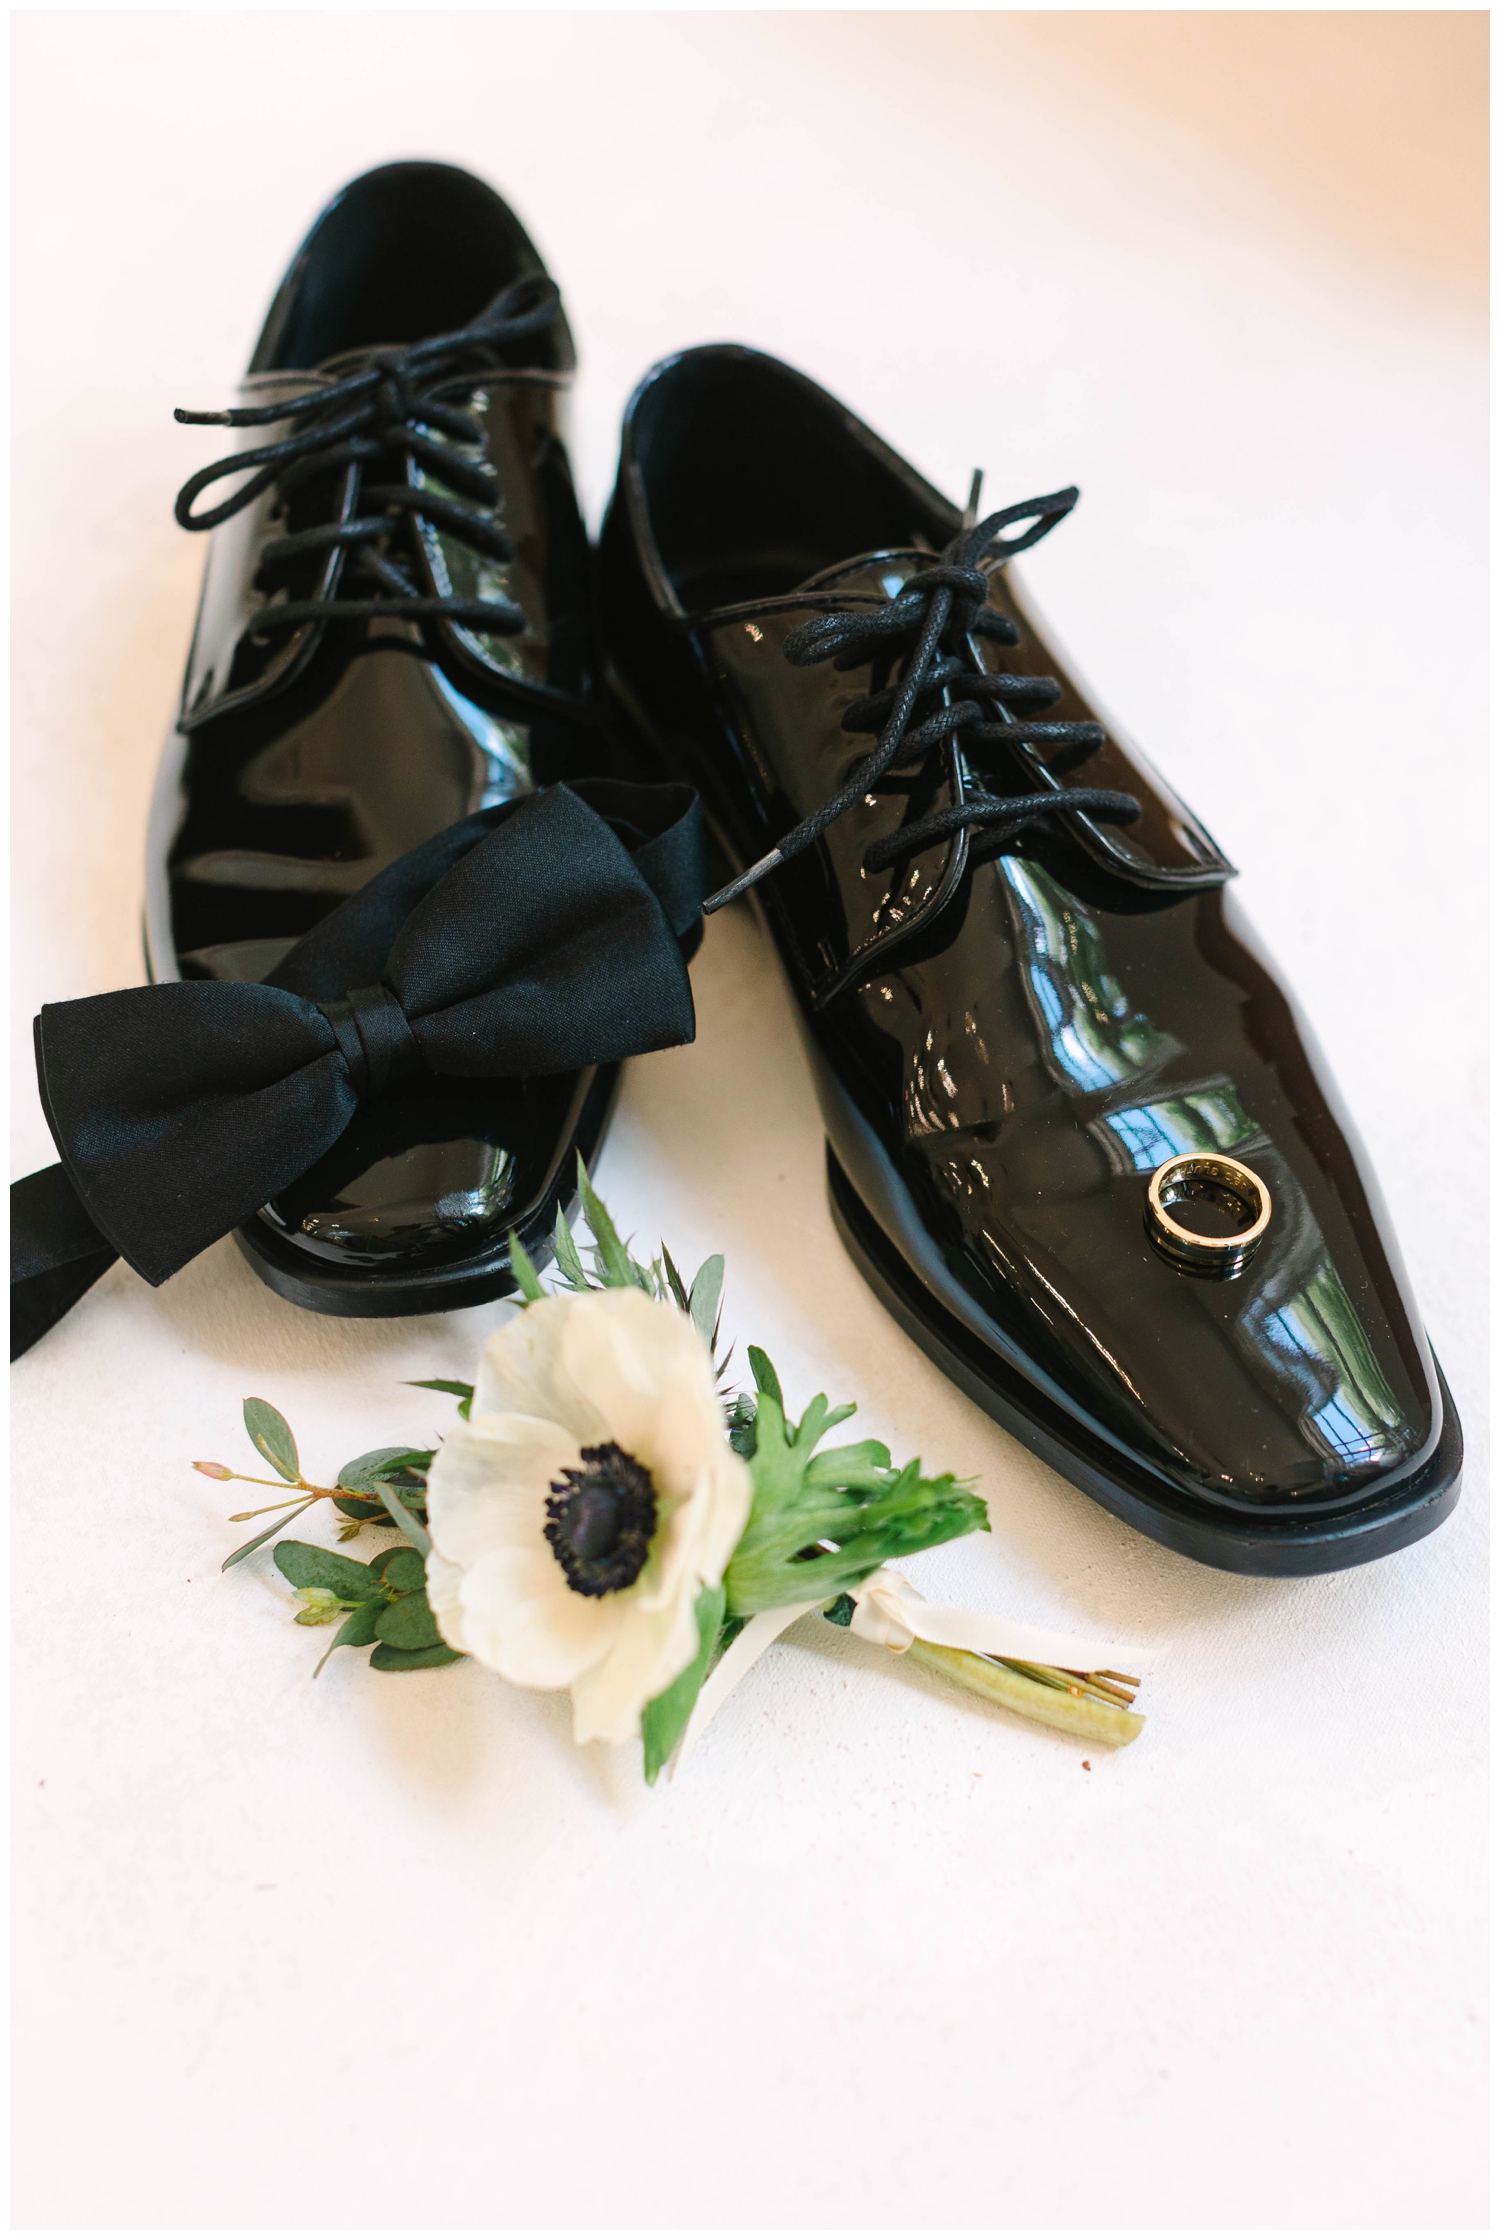 groom black shoes and bow tie details flatlay